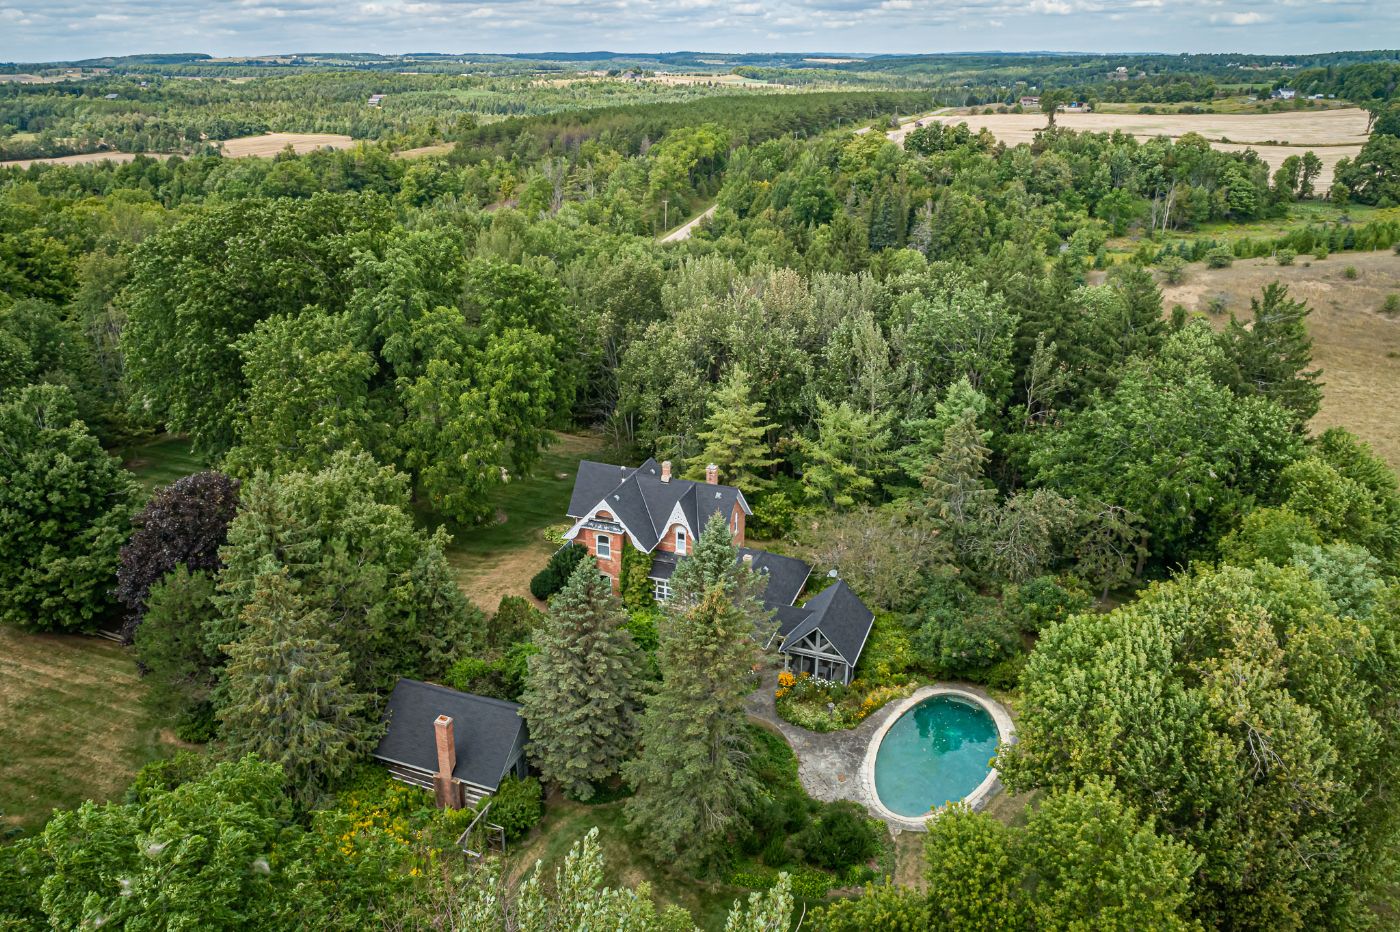 Country homes for sale and luxury real estate including horse farms and property in the Caledon and King City areas near Toronto